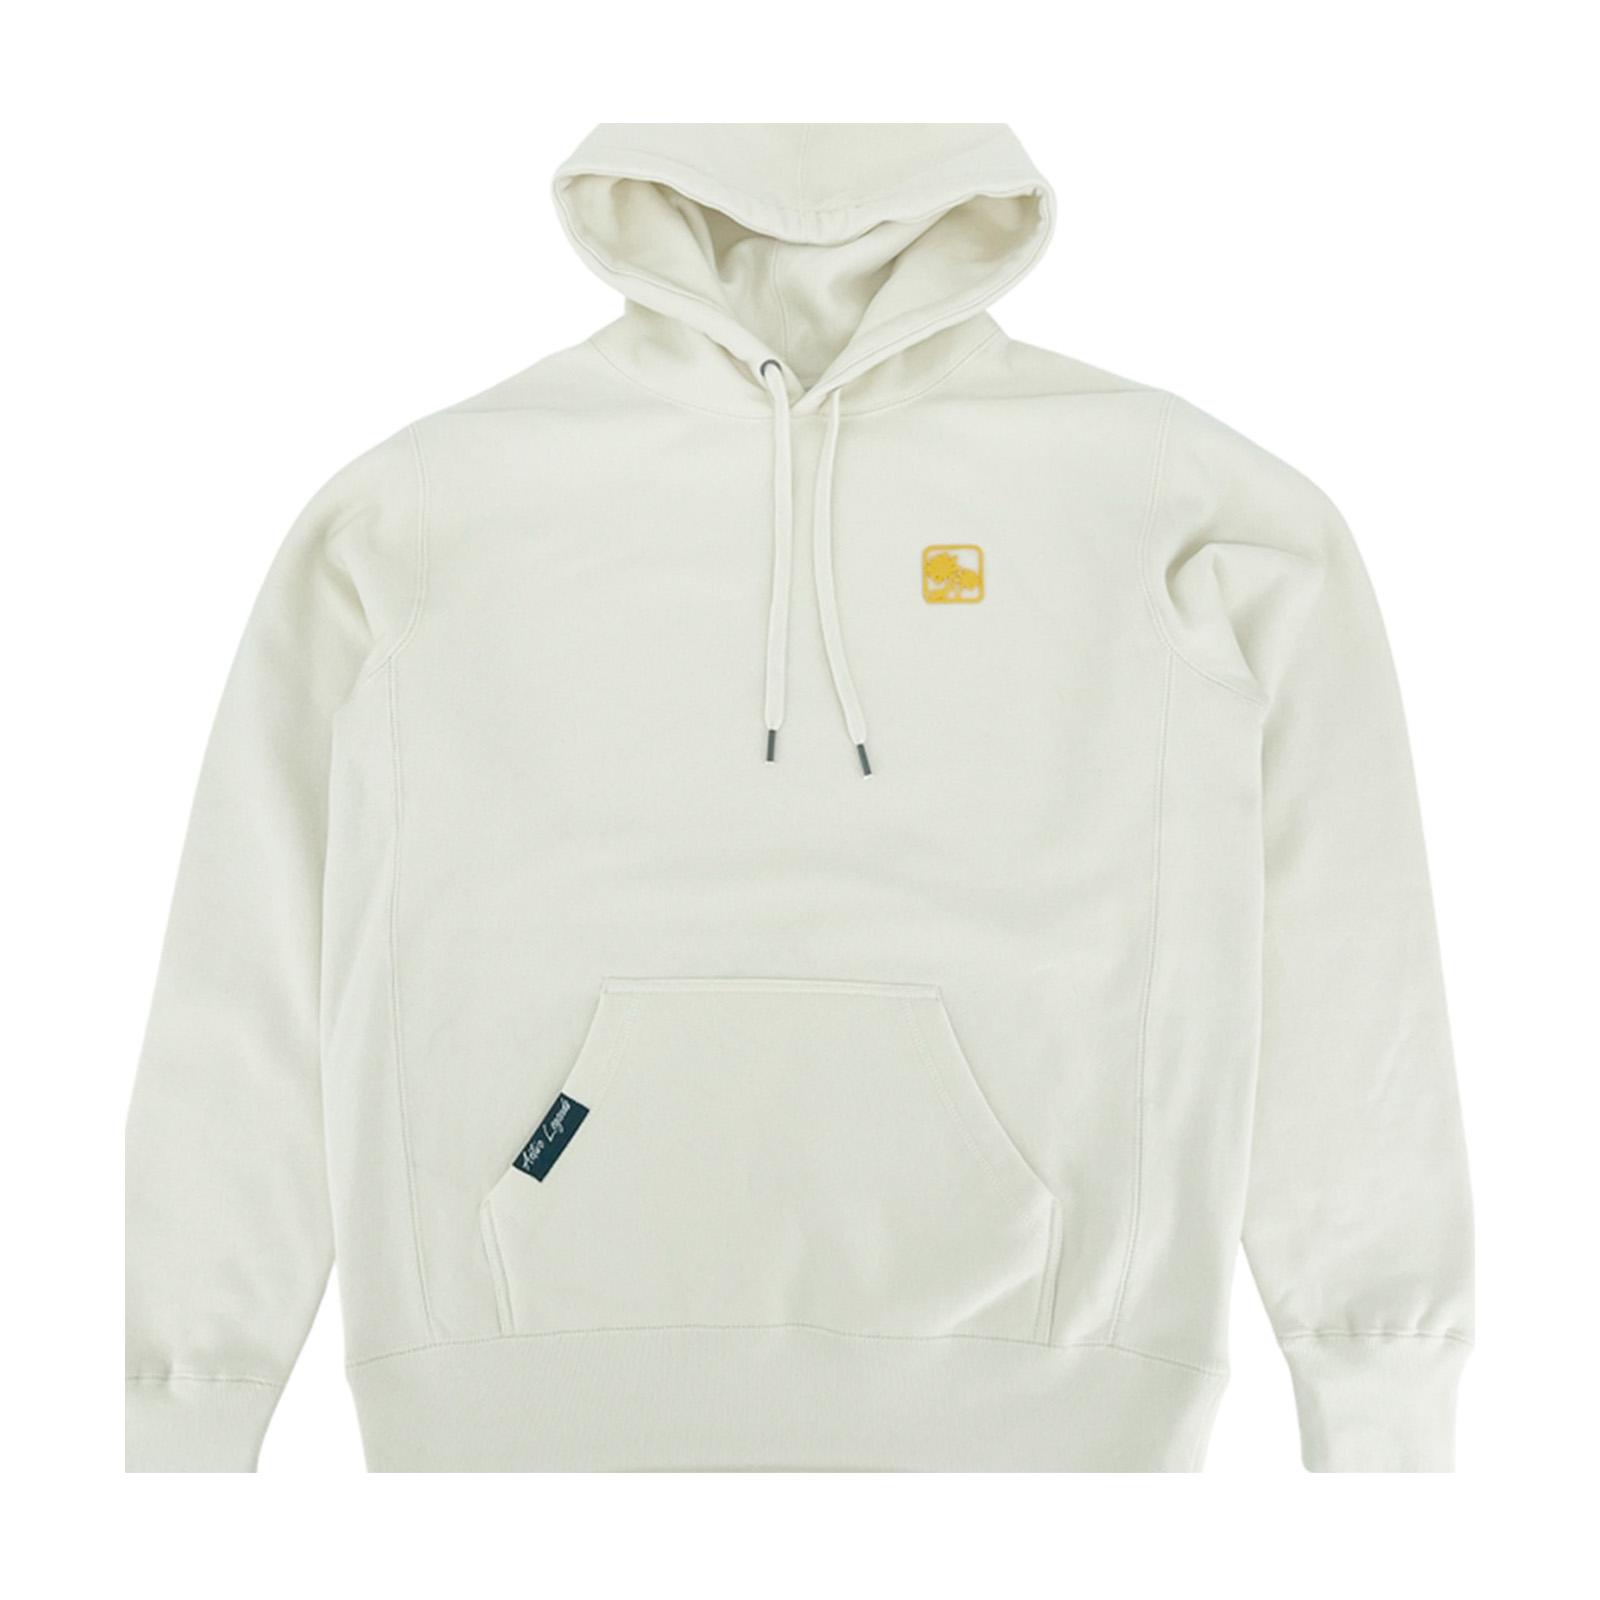 Lendale White Unisex Pullover Hoodie image11